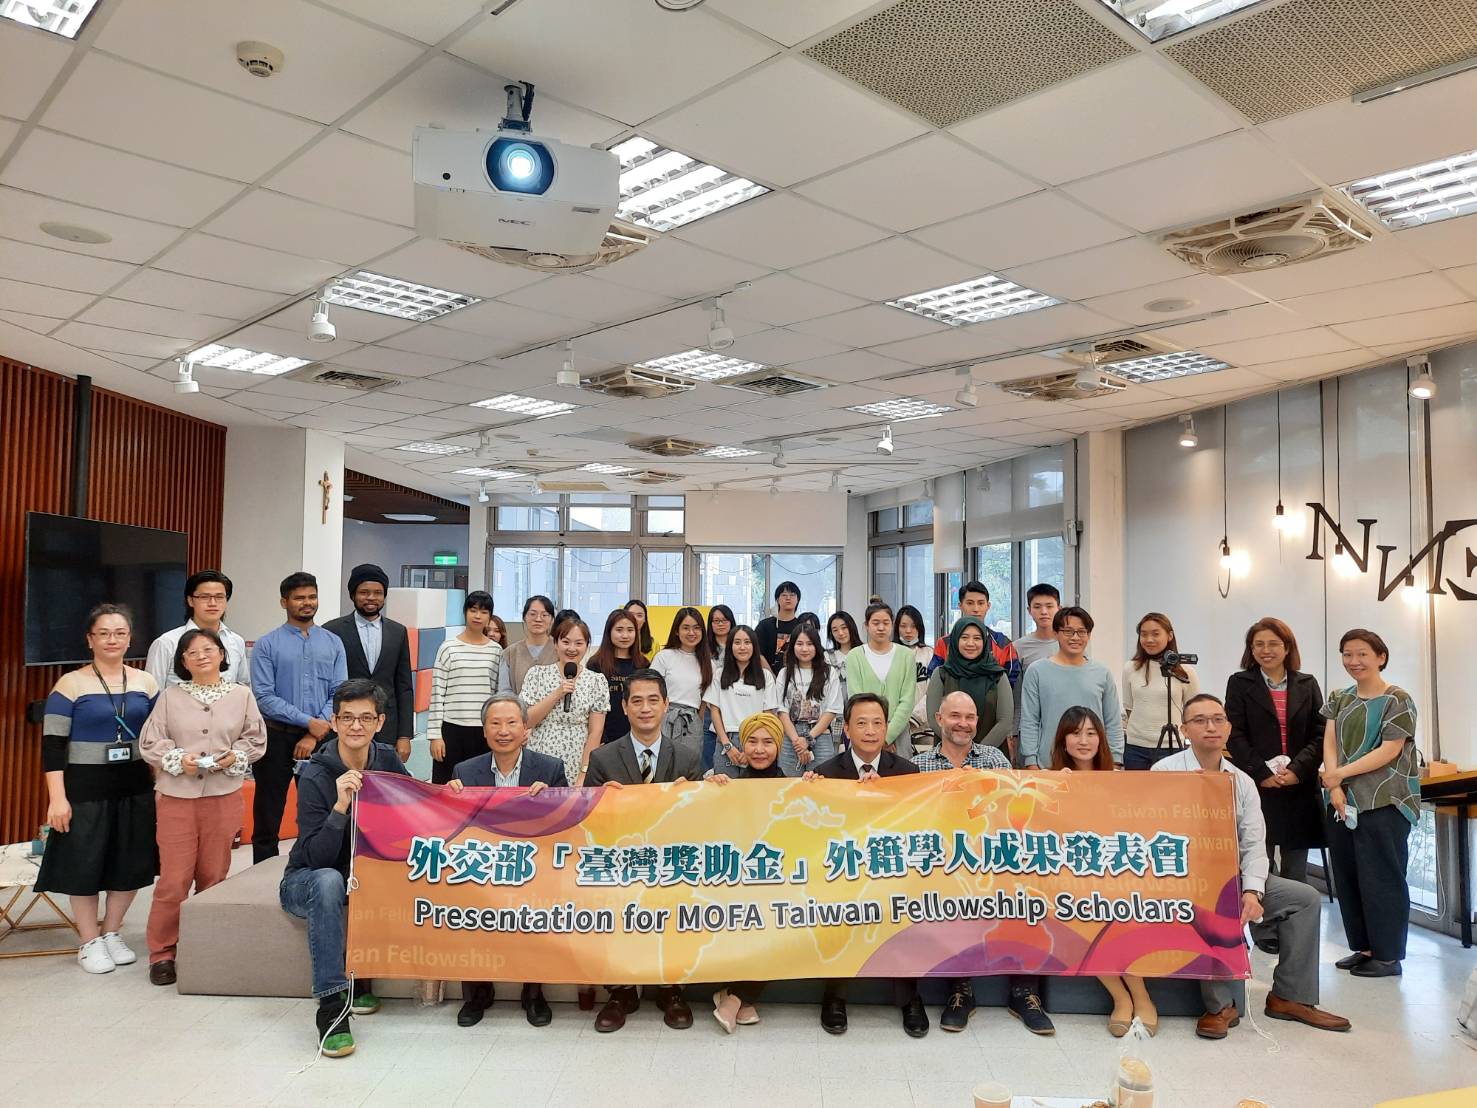 2021 Presentations of MOFA Taiwan Fellowship Scholars: Cross-Cultural Issue in Diplomatic Perspective